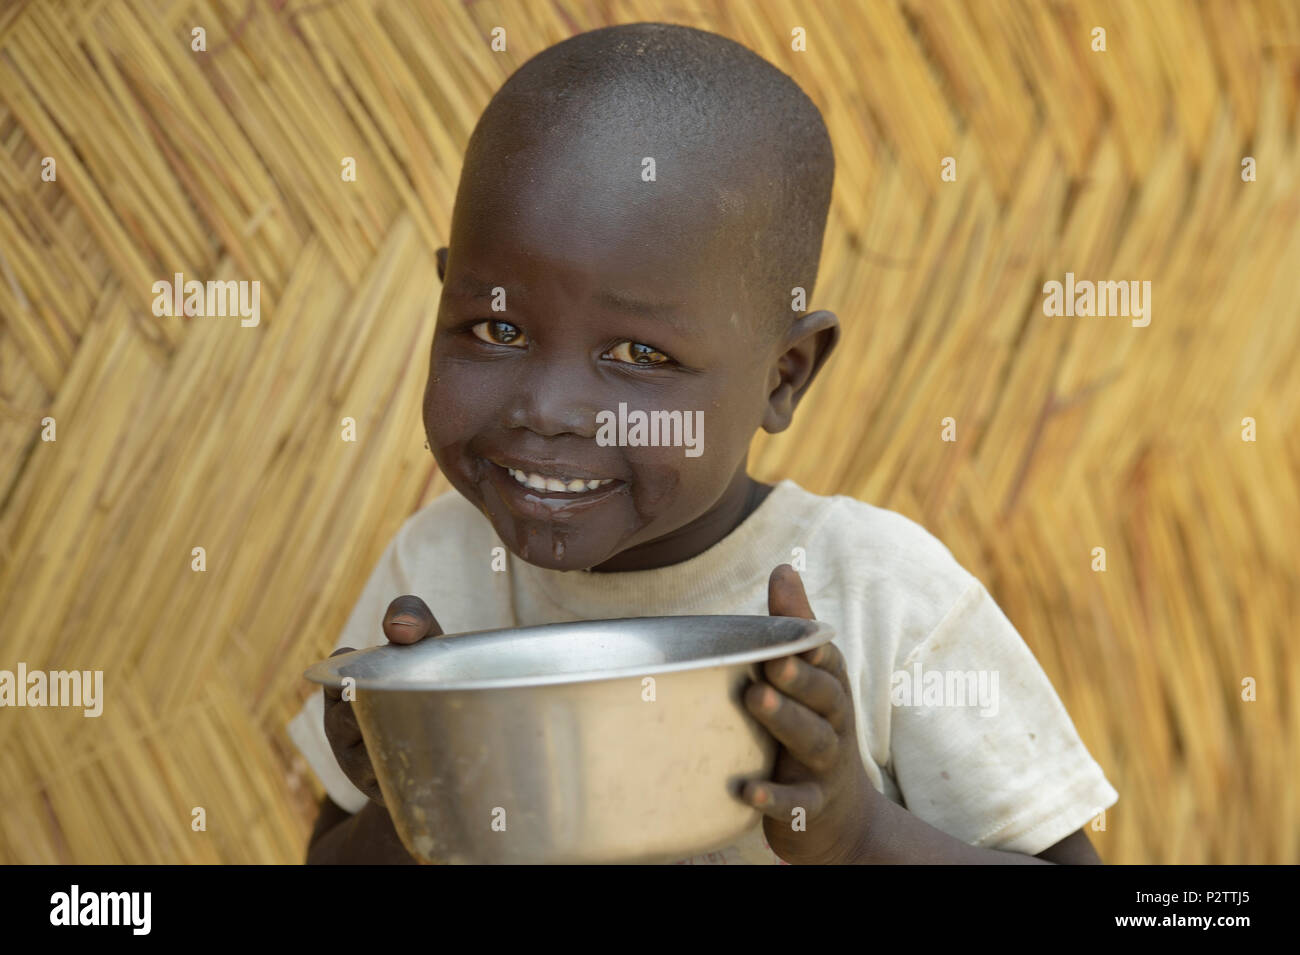 A child enjoys safe water in Malek Miir, a village in South Sudan's Lol State where a persistent drought has destroyed crops and left people hungry. Stock Photo